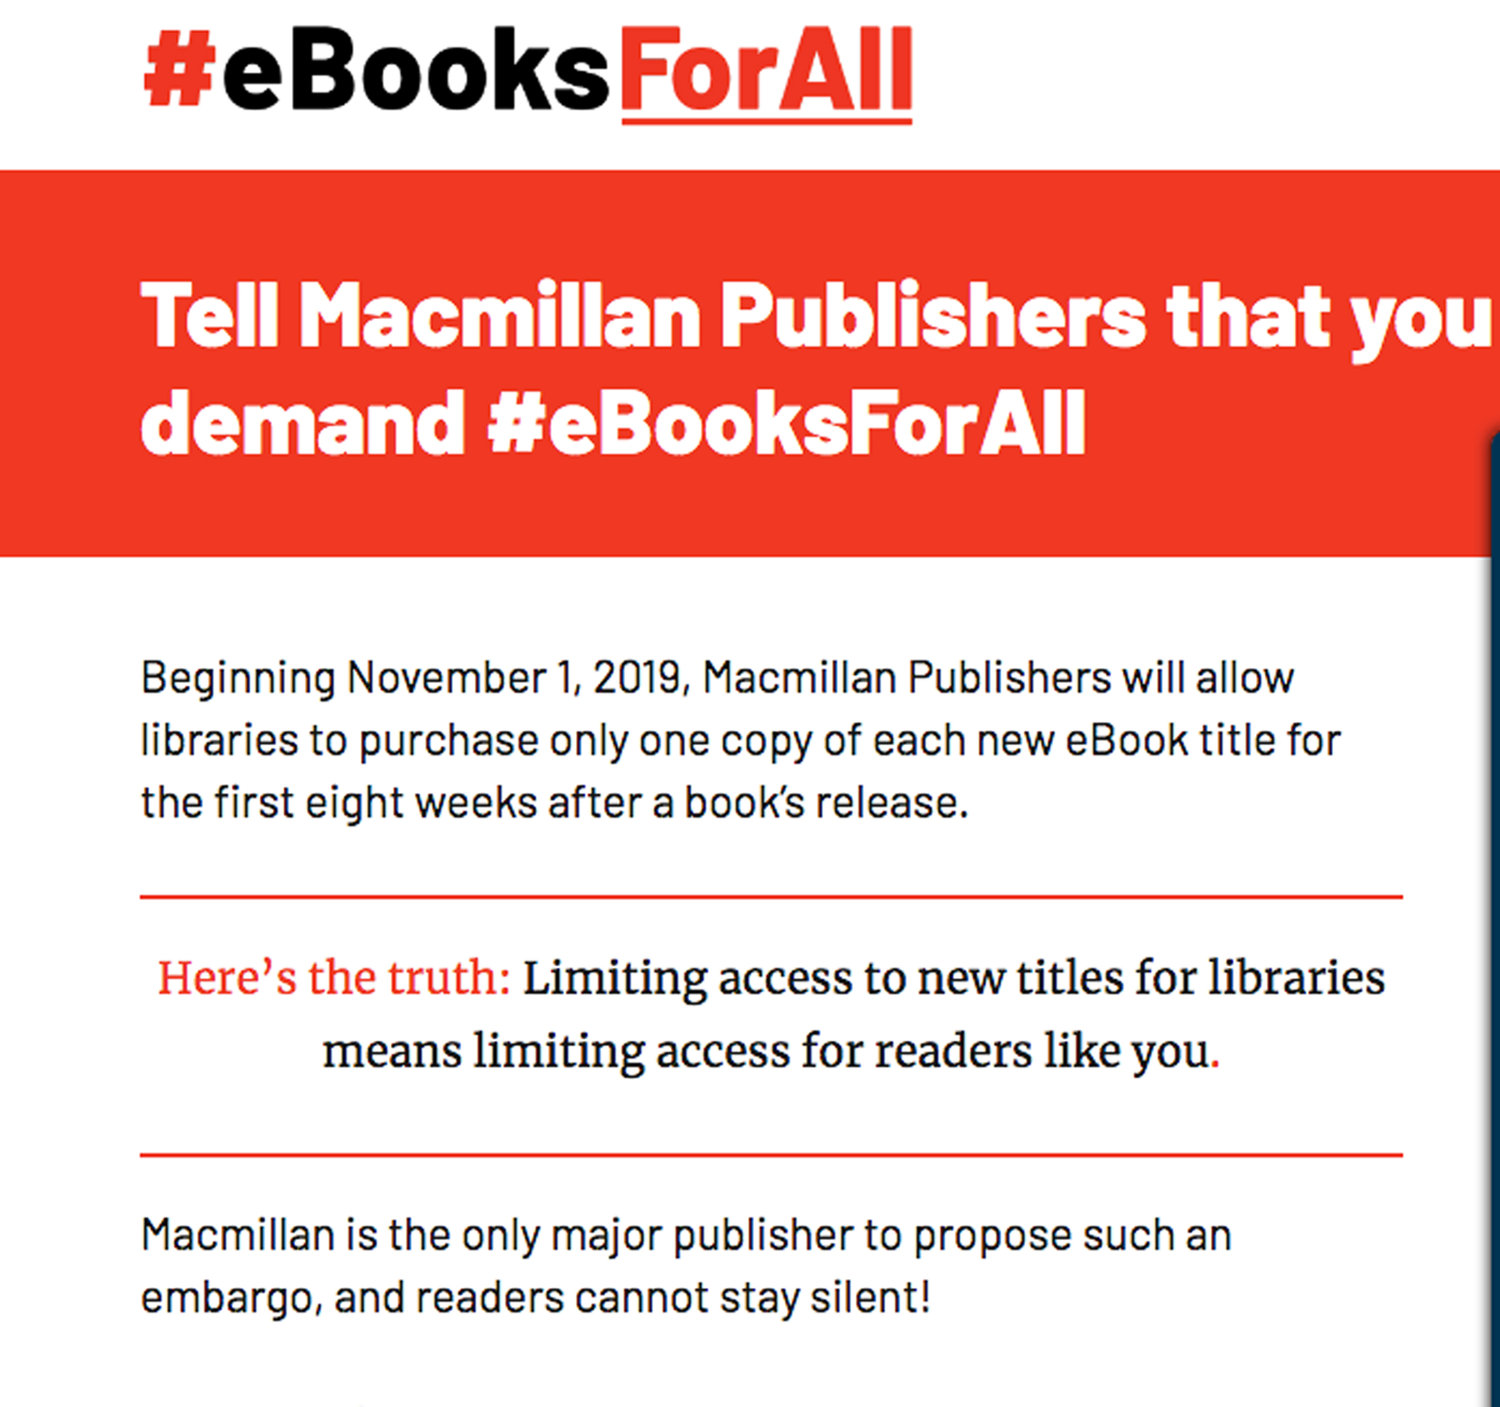 Macmillan Publishers announced a limit on eBook sales to all public libraries effective Nov. 1.